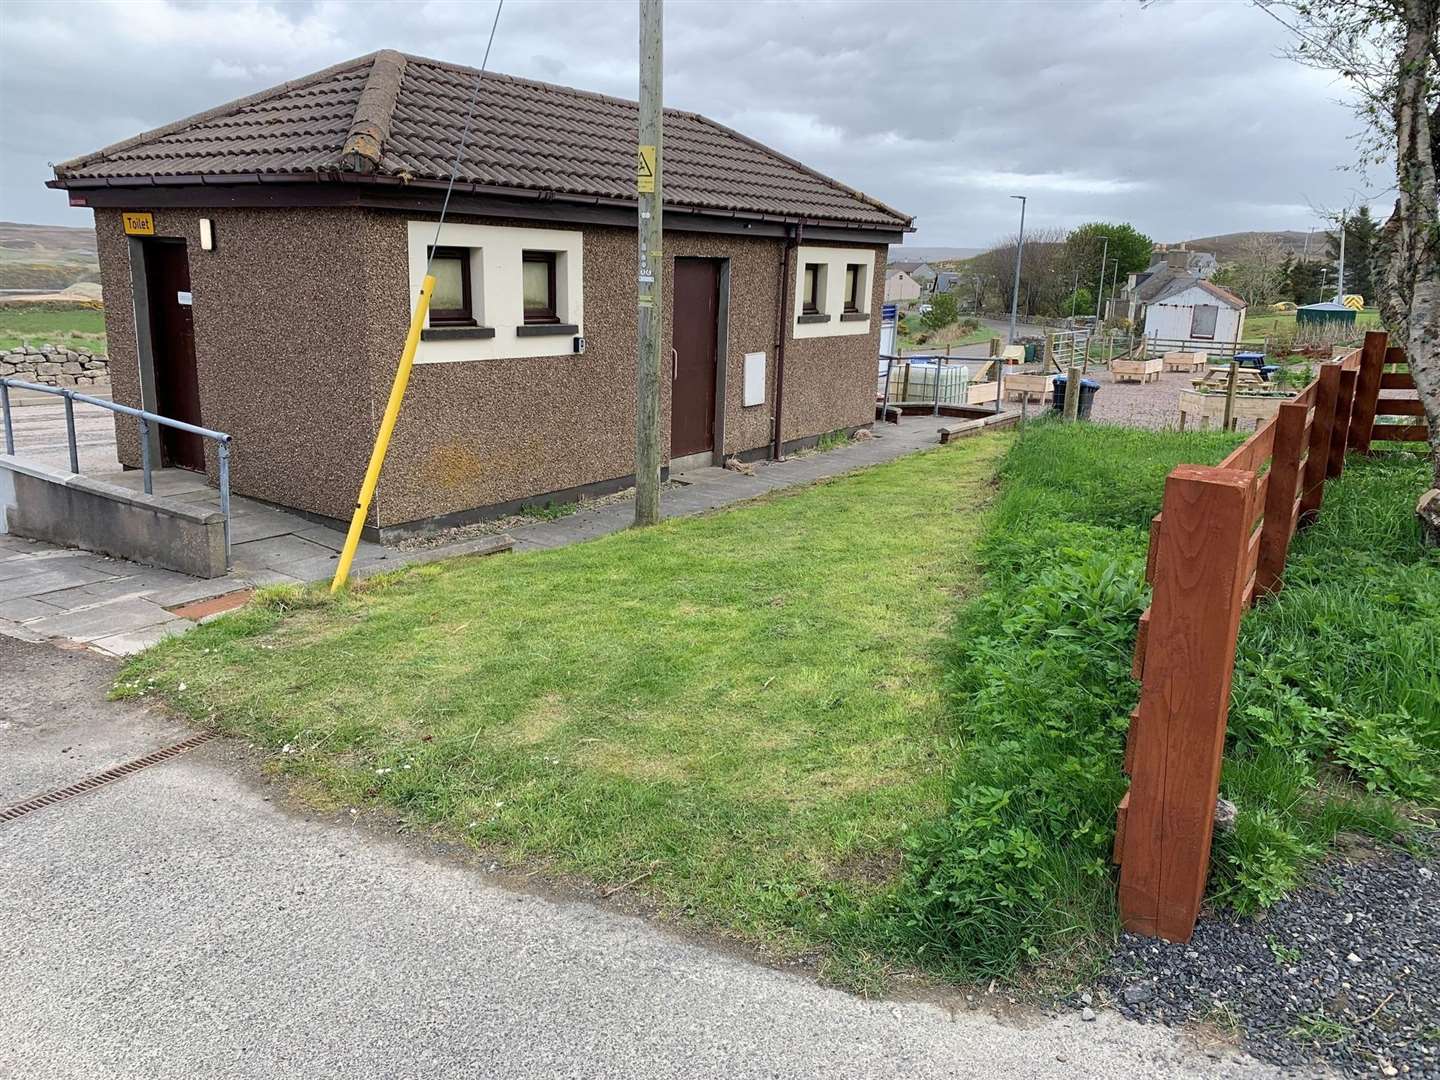 Melvich Community SCIO have initiated an asset transfer for the public toilet block in the village.